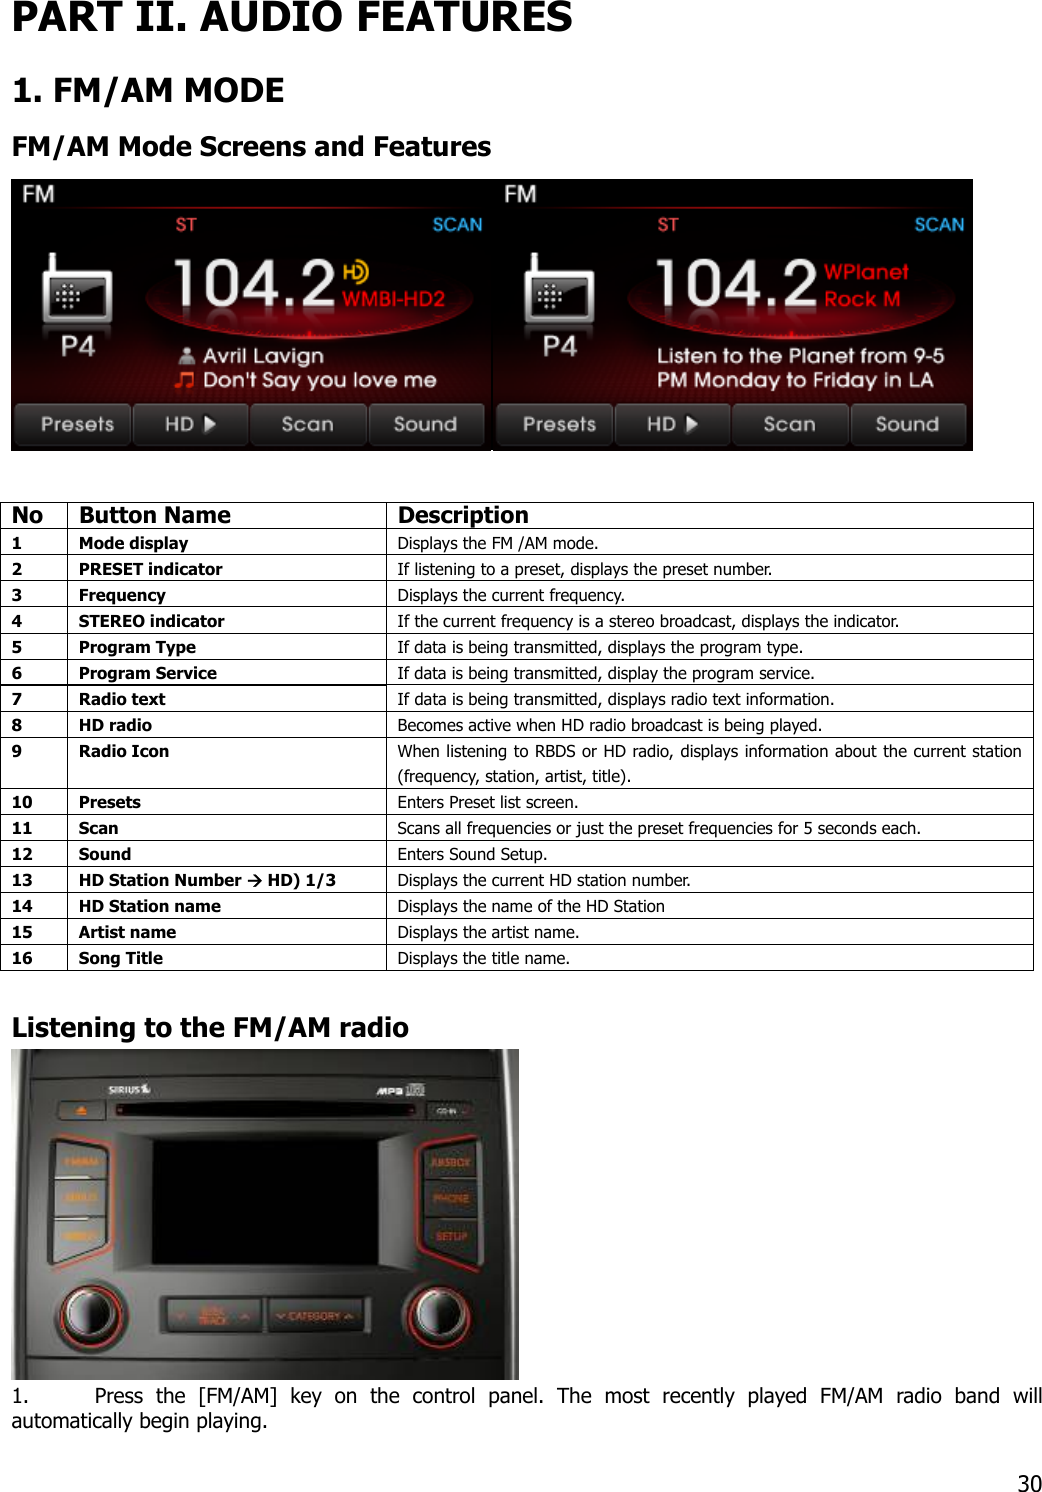 PART II. AUDIO FEATURES 1. FM/AM MODE FM/AM Mode Screens and Features          No Button Name  Description 1 Mode display  Displays the FM /AM mode. 2 PRESET indicator  If listening to a preset, displays the preset number. 3 Frequency  Displays the current frequency. 4 STEREO indicator  If the current frequency is a stereo broadcast, displays the indicator. 5 Program Type   If data is being transmitted, displays the program type. 6 Program Service  If data is being transmitted, display the program service. 7 Radio text  If data is being transmitted, displays radio text information. 8 HD radio   Becomes active when HD radio broadcast is being played. 9 Radio Icon  When listening to RBDS or HD radio, displays information about the current station (frequency, station, artist, title). 10 Presets  Enters Preset list screen. 11 Scan   Scans all frequencies or just the preset frequencies for 5 seconds each. 12 Sound  Enters Sound Setup. 13 HD Station Number  HD) 1/3  Displays the current HD station number. 14  HD Station name  Displays the name of the HD Station 15 Artist name  Displays the artist name. 16 Song Title  Displays the title name.  Listening to the FM/AM radio   1. Press the [FM/AM] key on the control panel. The most recently played FM/AM radio band will automatically begin playing.    30